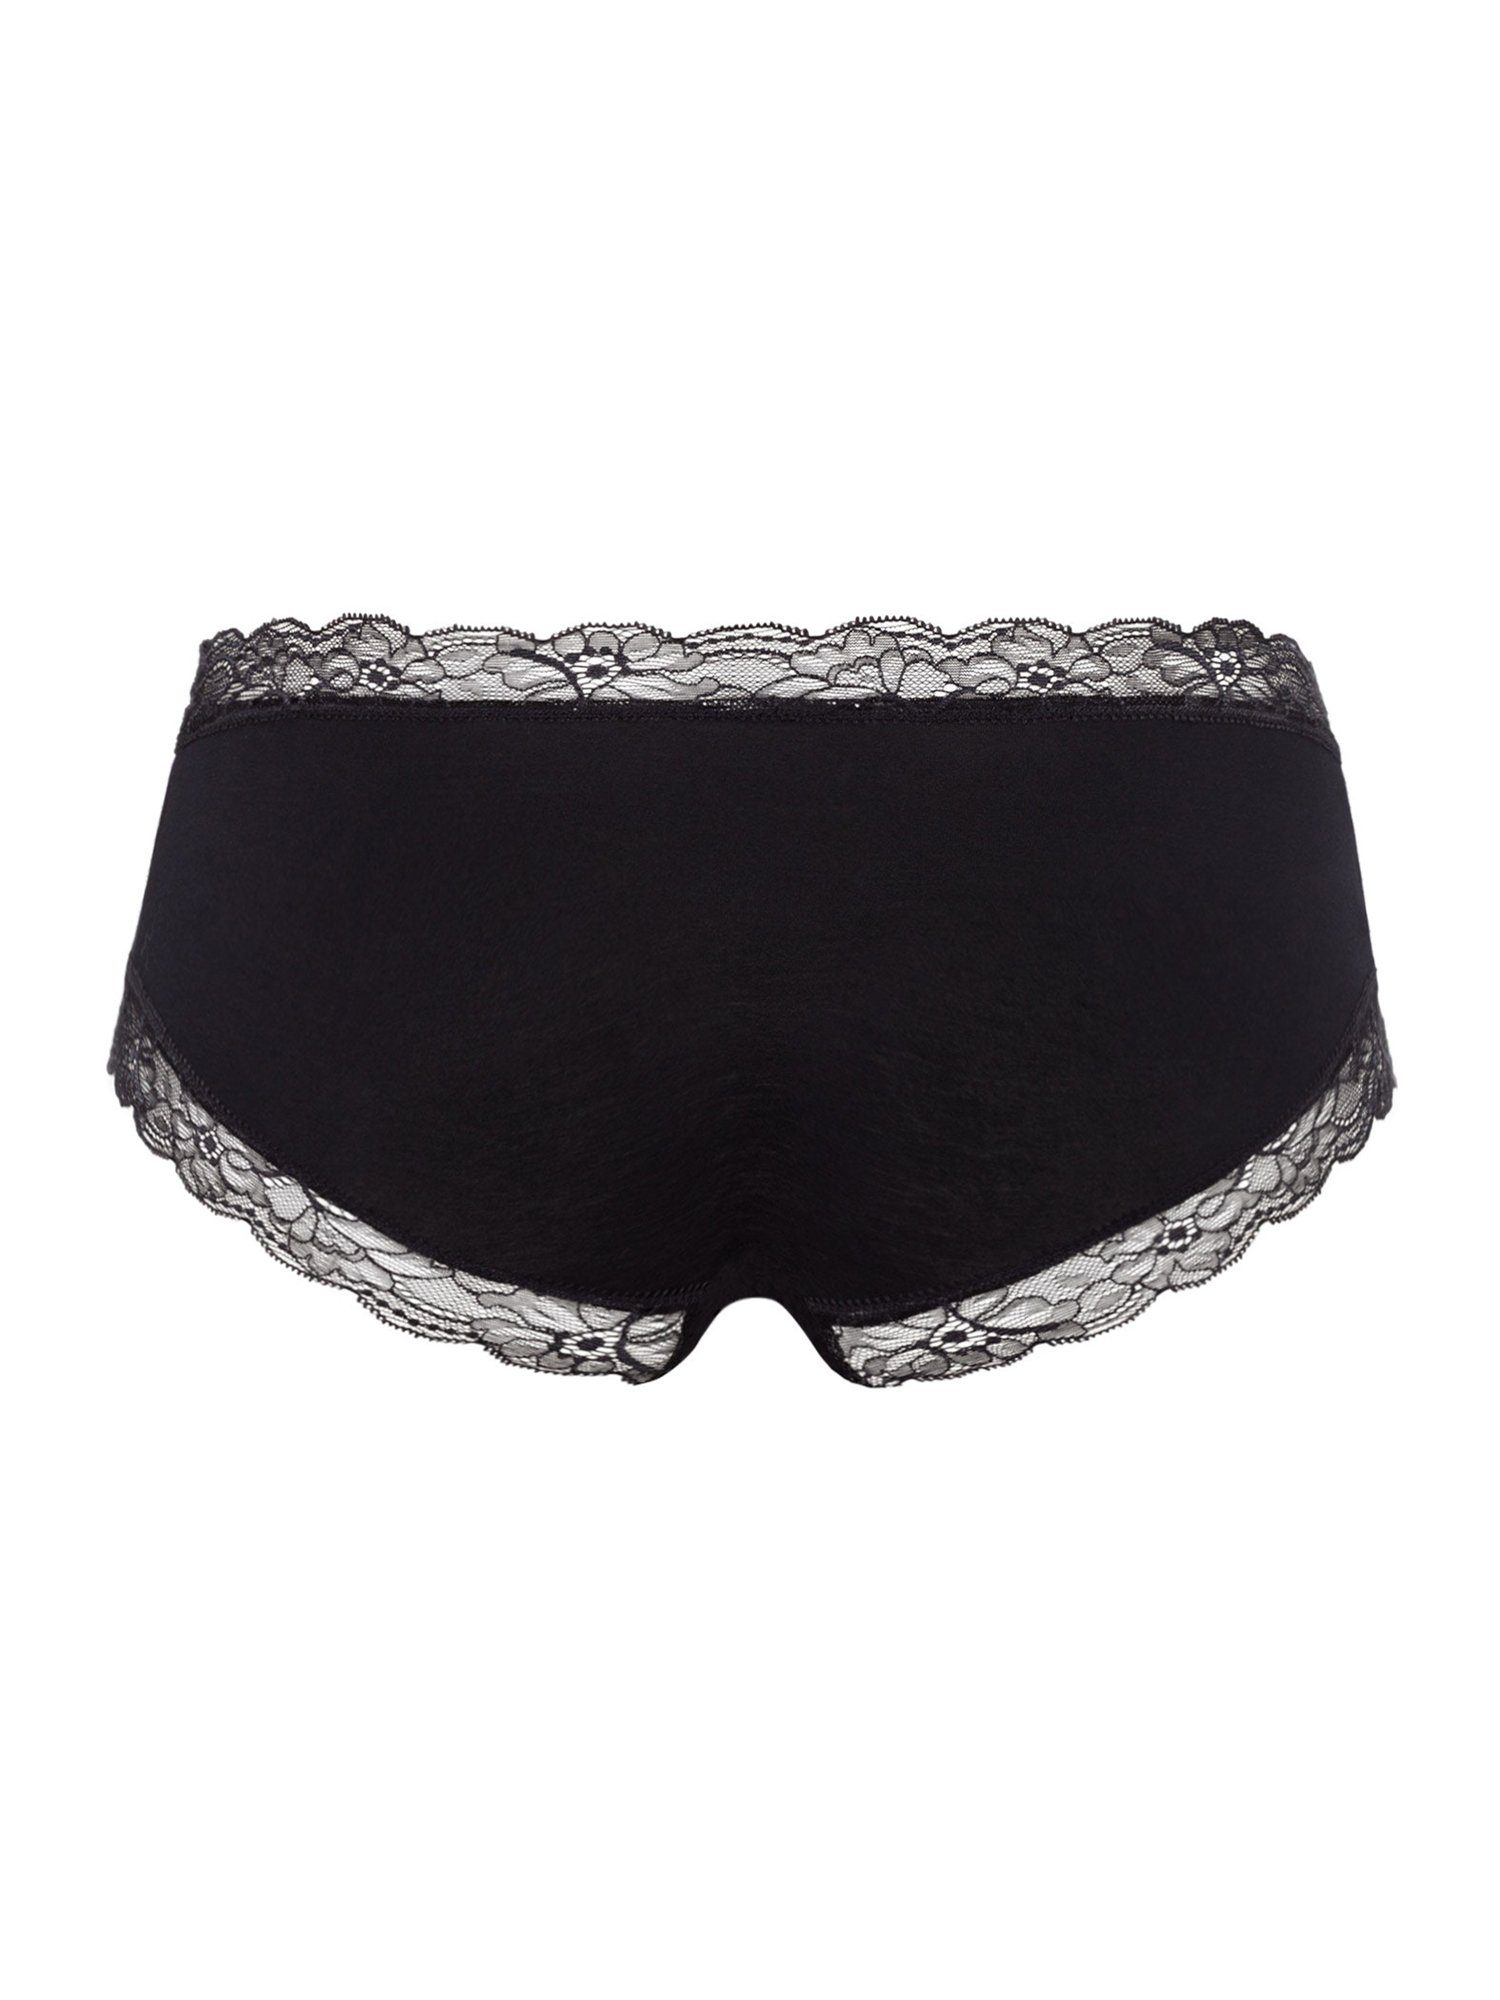 Panty Lace Hanro Hipster Cotton black (1-St)